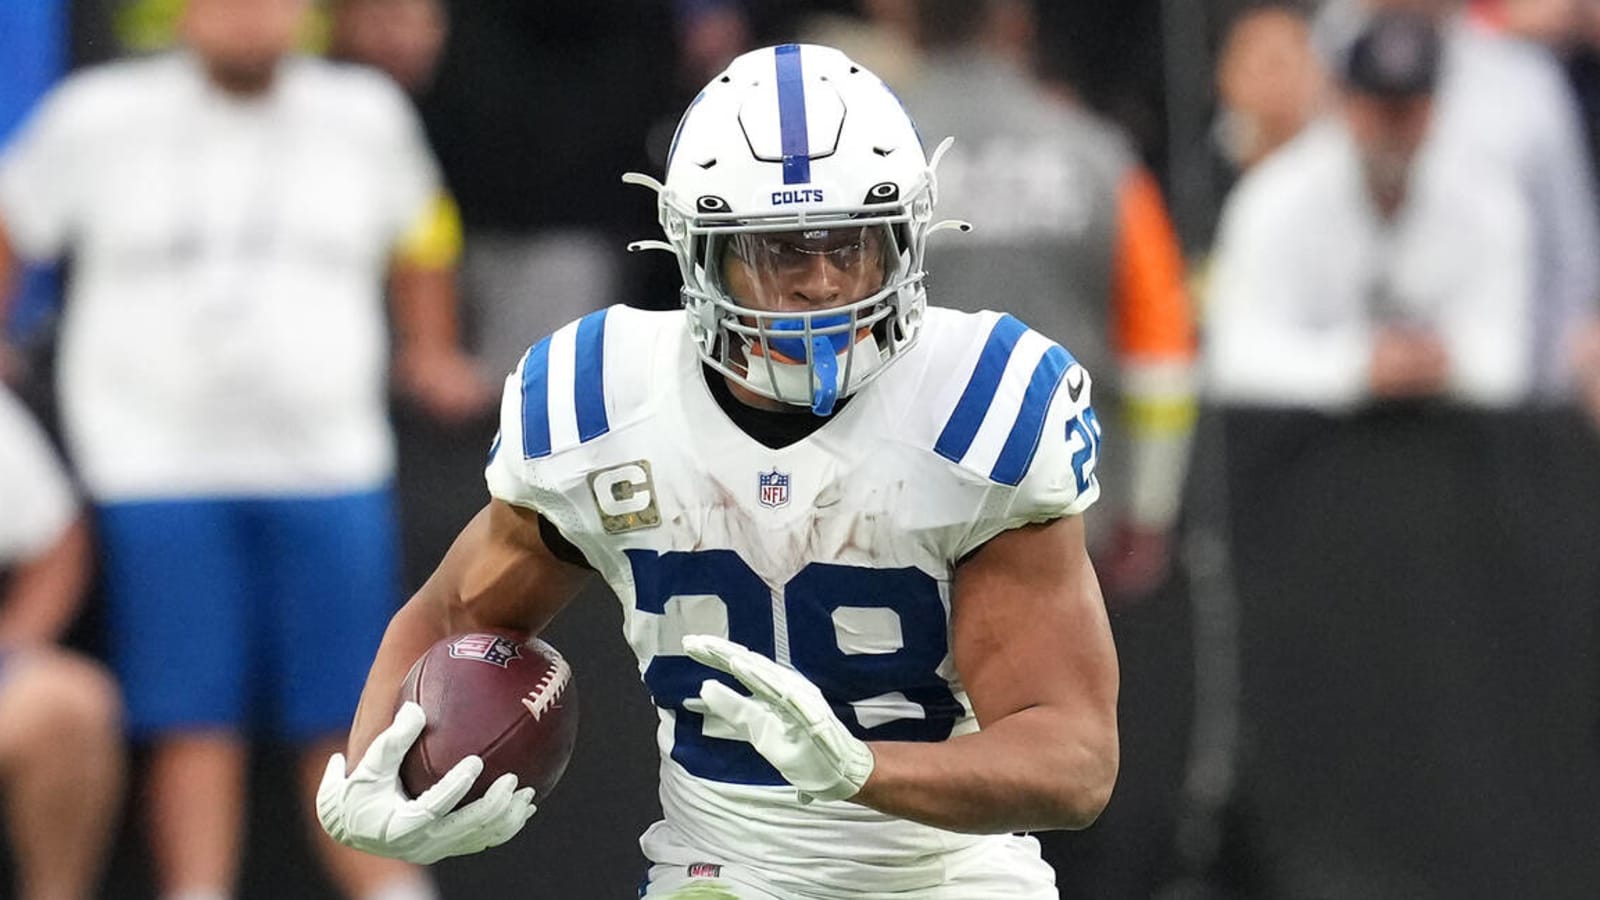 Colts' relationship with offensive star is 'unraveling'